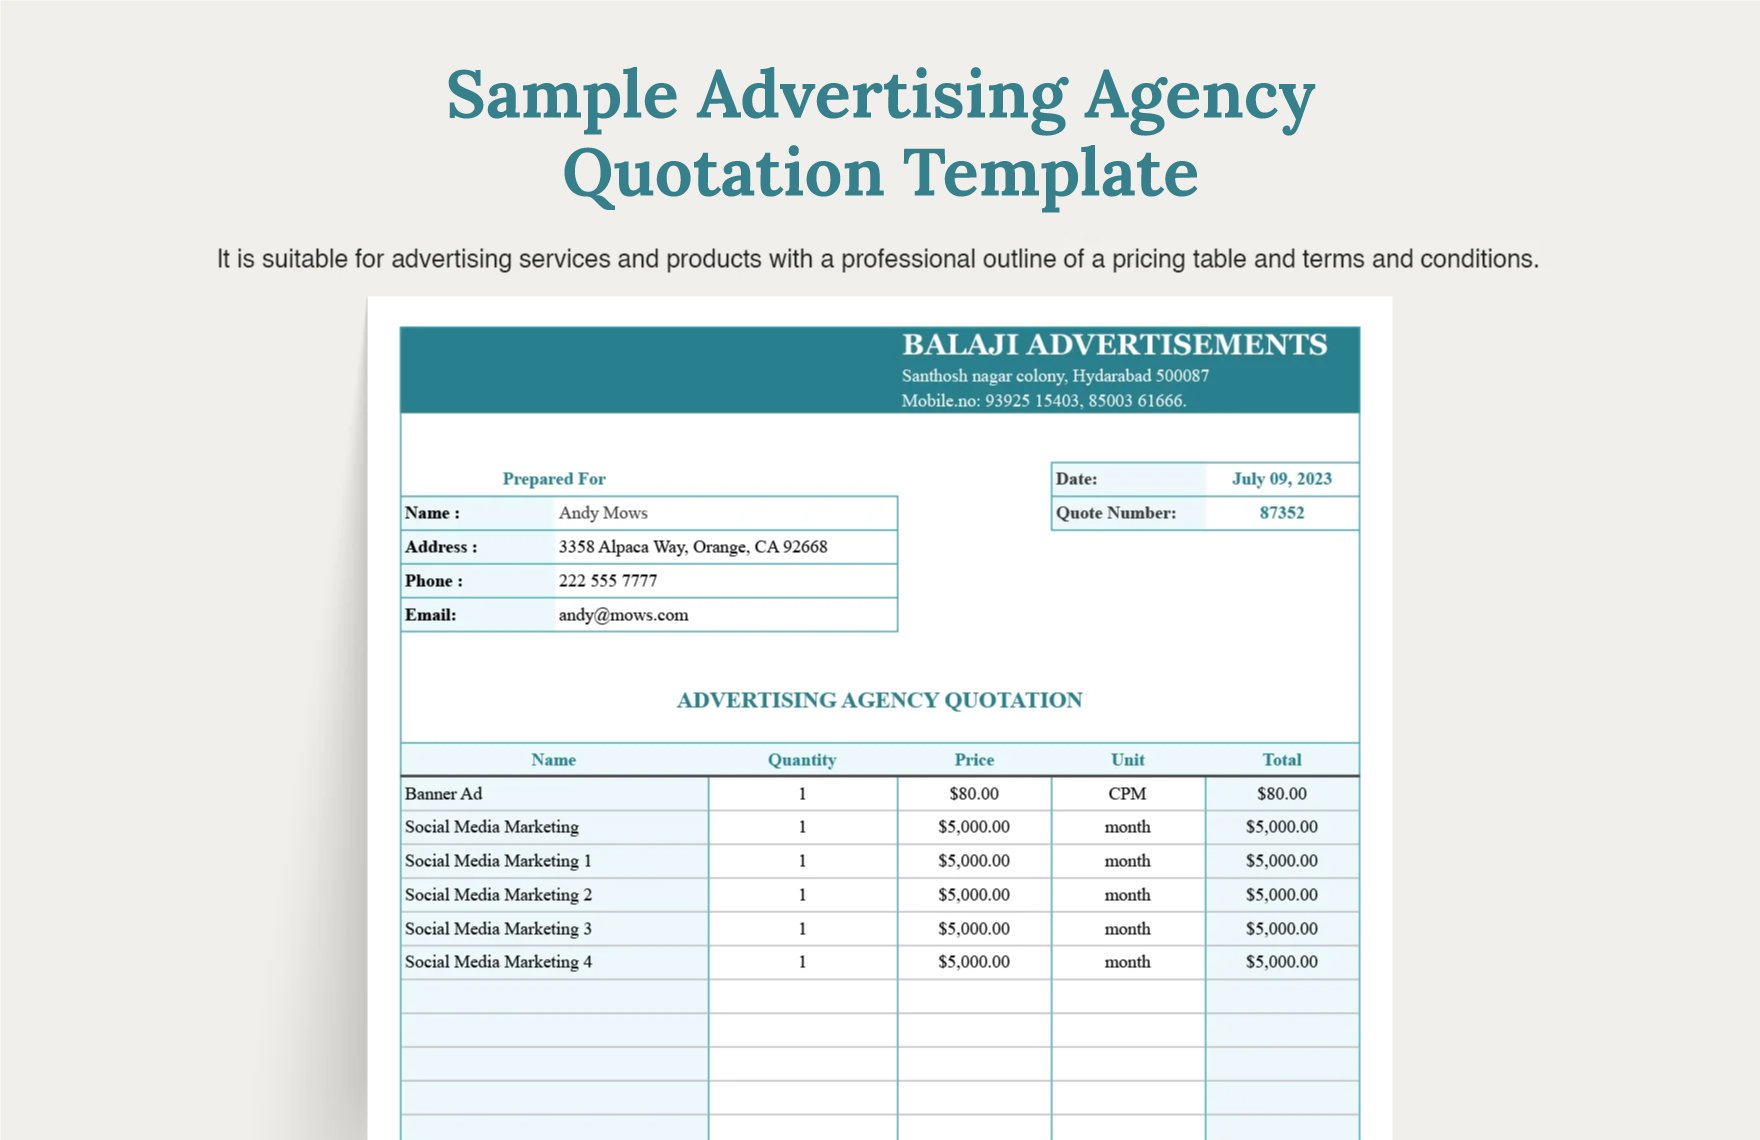 Sample Advertising Agency Quotation Template in Word, Google Docs, Excel, Google Sheets